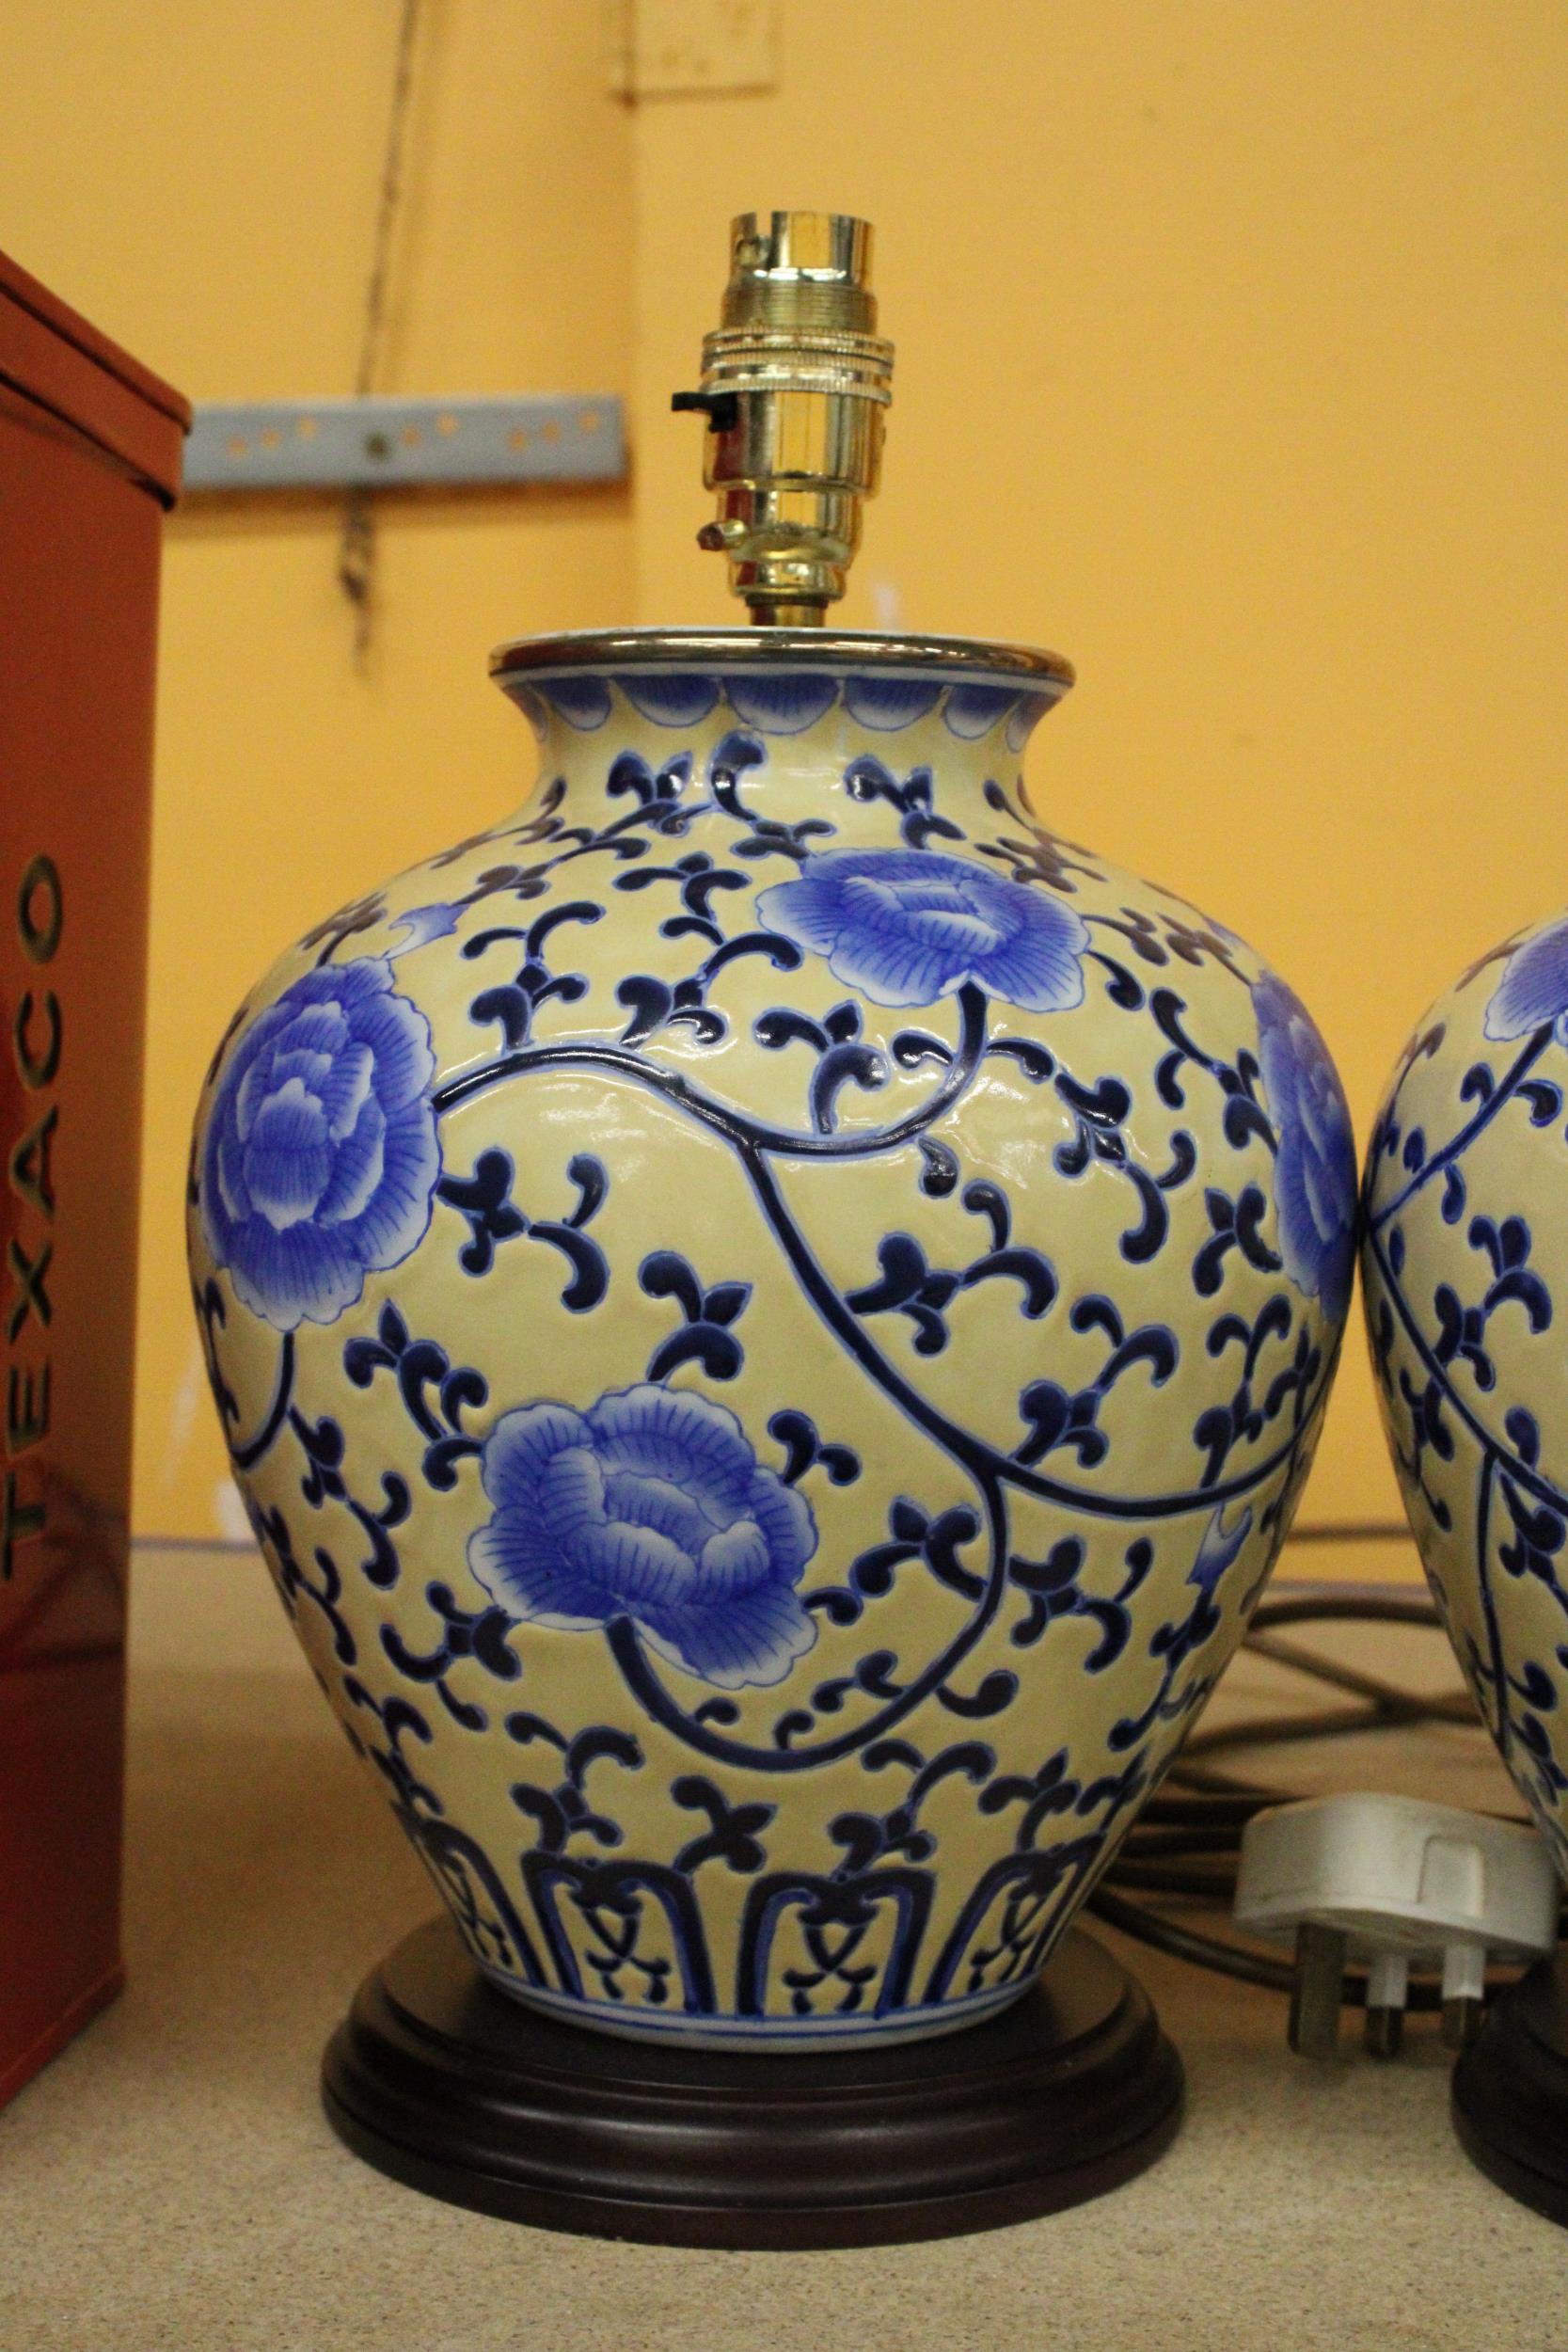 A PAIR OF ORIENTAL STYLE TABLE LAMPS - Image 3 of 4